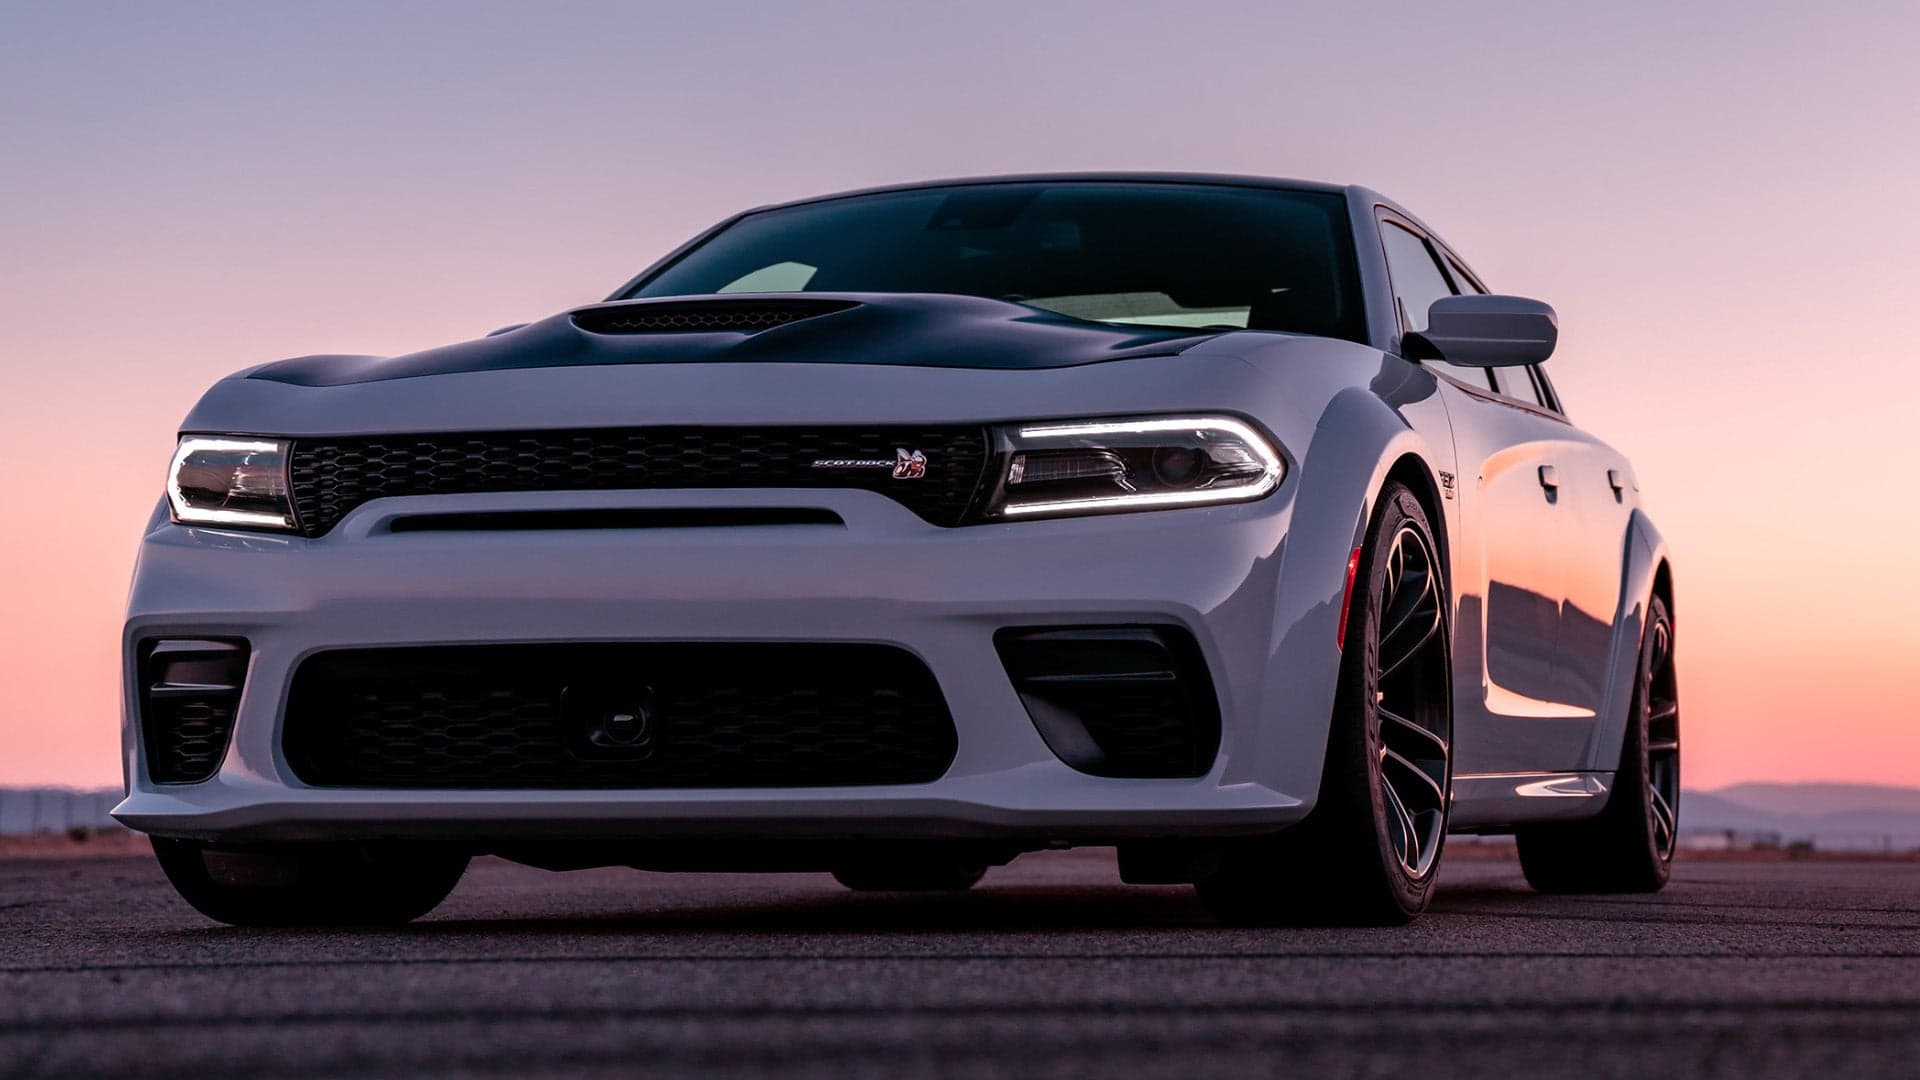 Dodge Challenger, Charger and Hellcat Engines Will Die By 2024